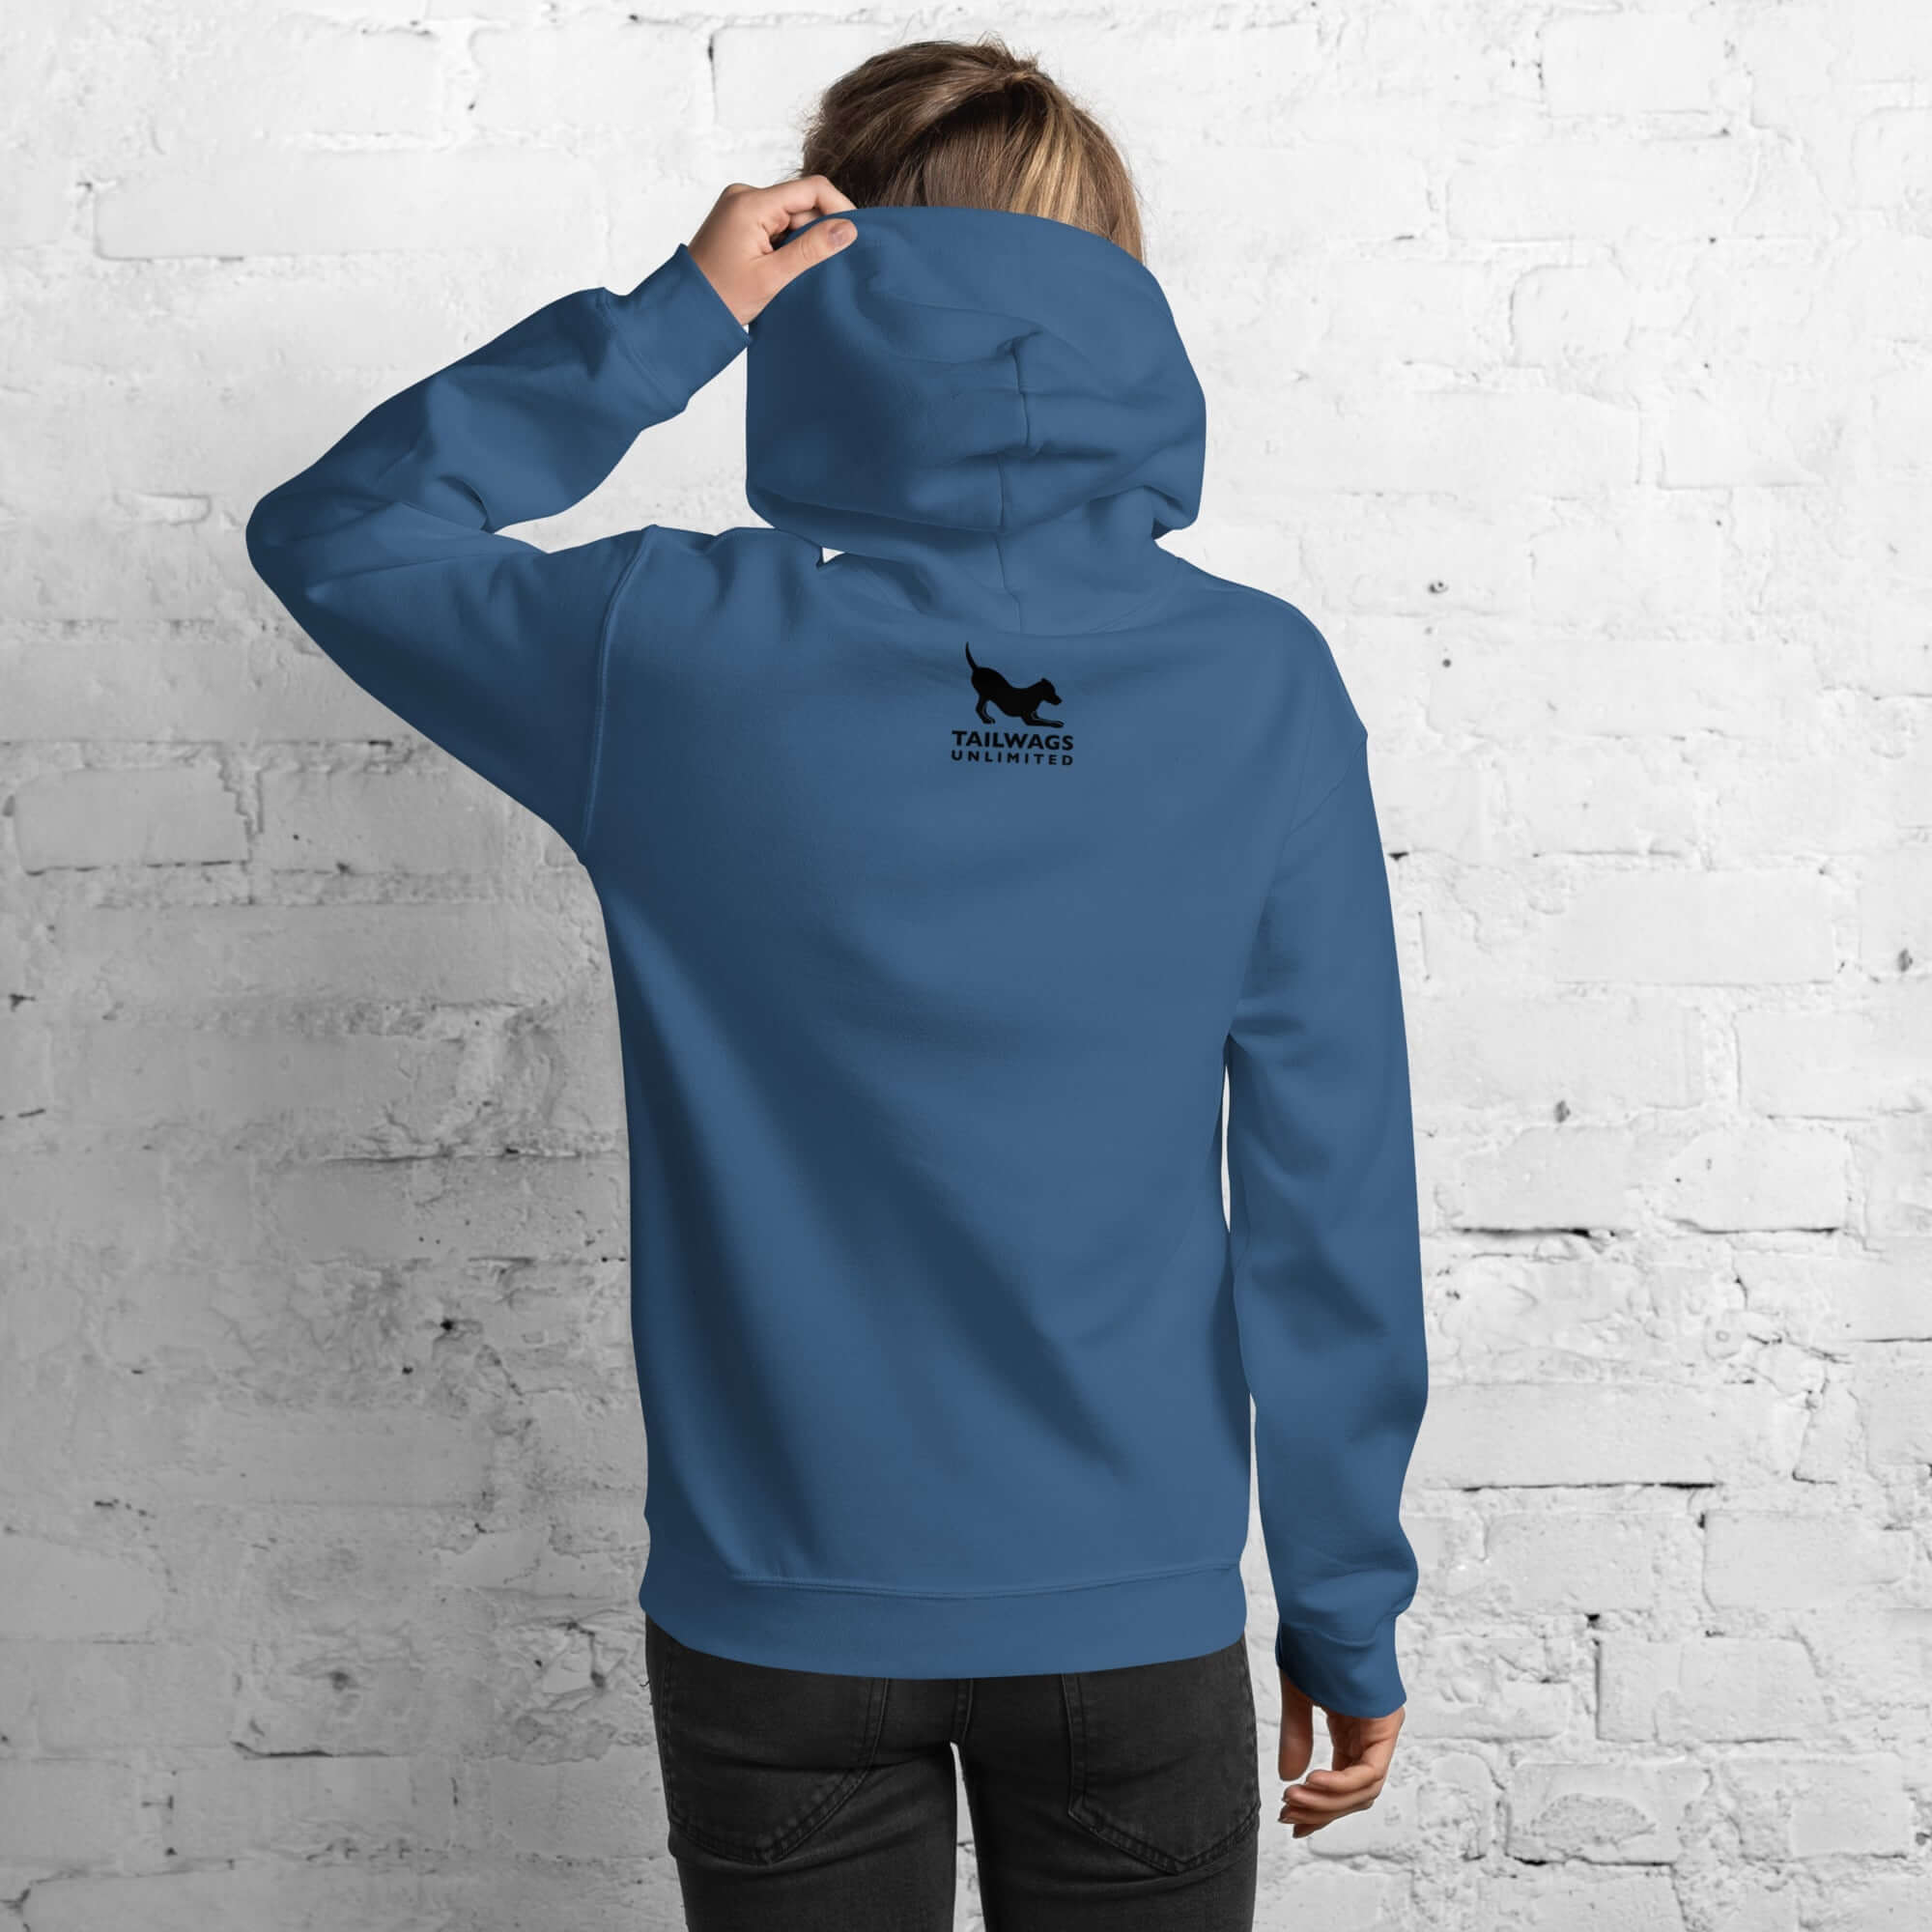 Life is Better Hoodie - TAILWAGS UNLIMITED